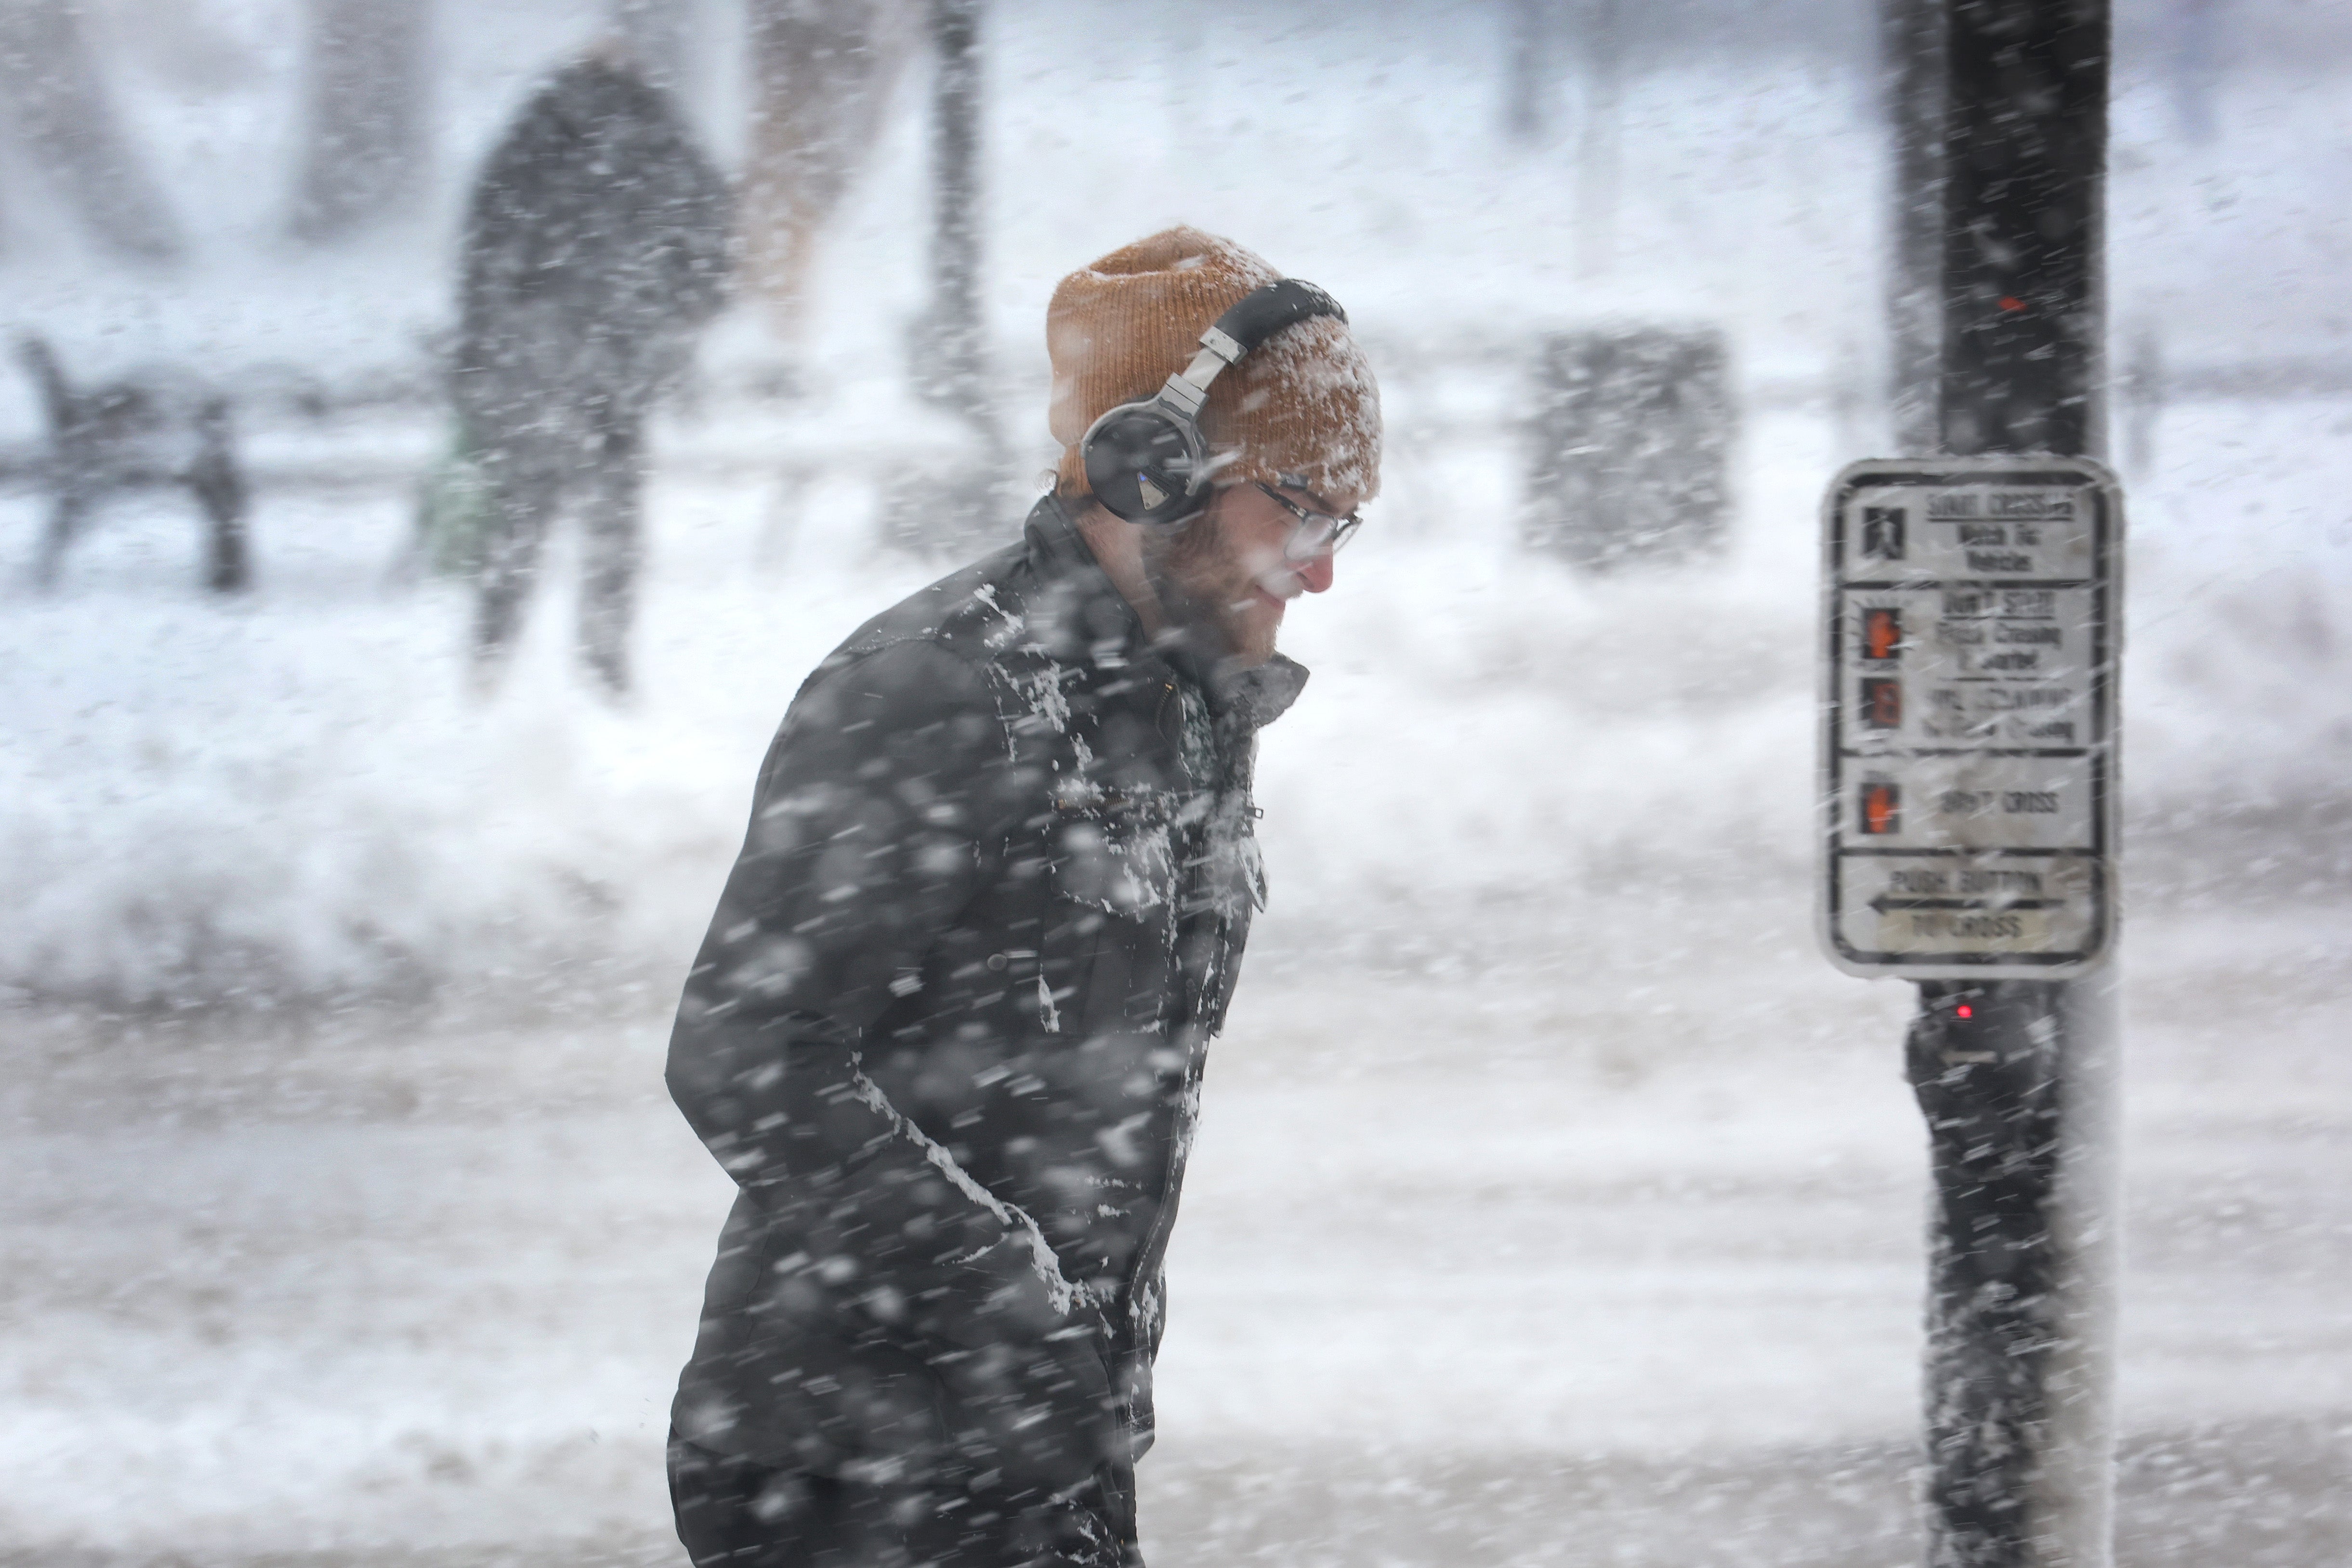 Extreme Cold Snaps Could Get Worse as Climate Warms